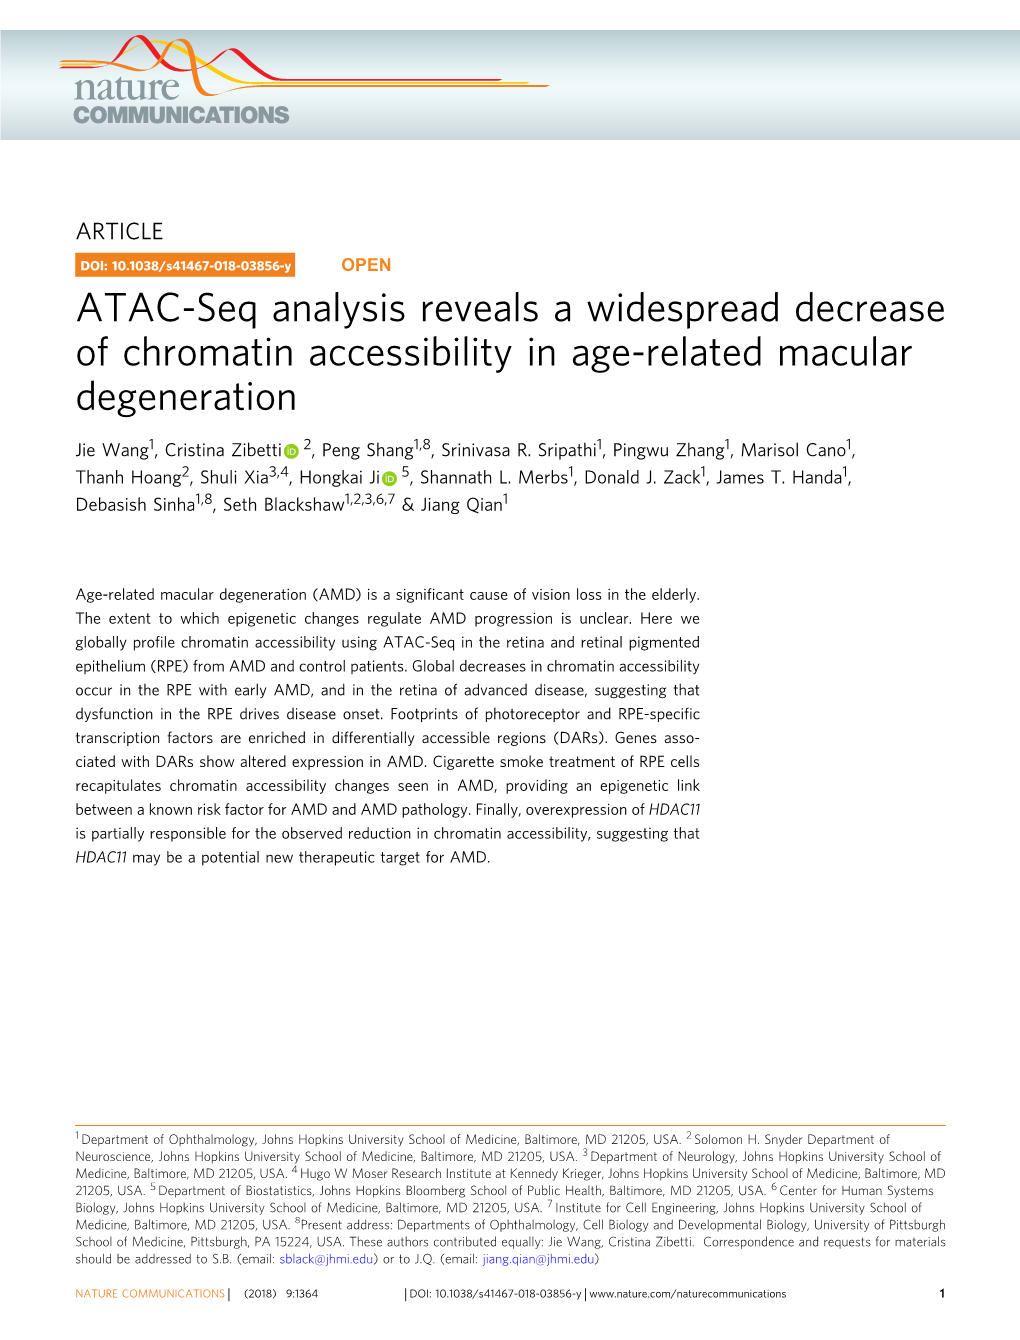 ATAC-Seq Analysis Reveals a Widespread Decrease of Chromatin Accessibility in Age-Related Macular Degeneration